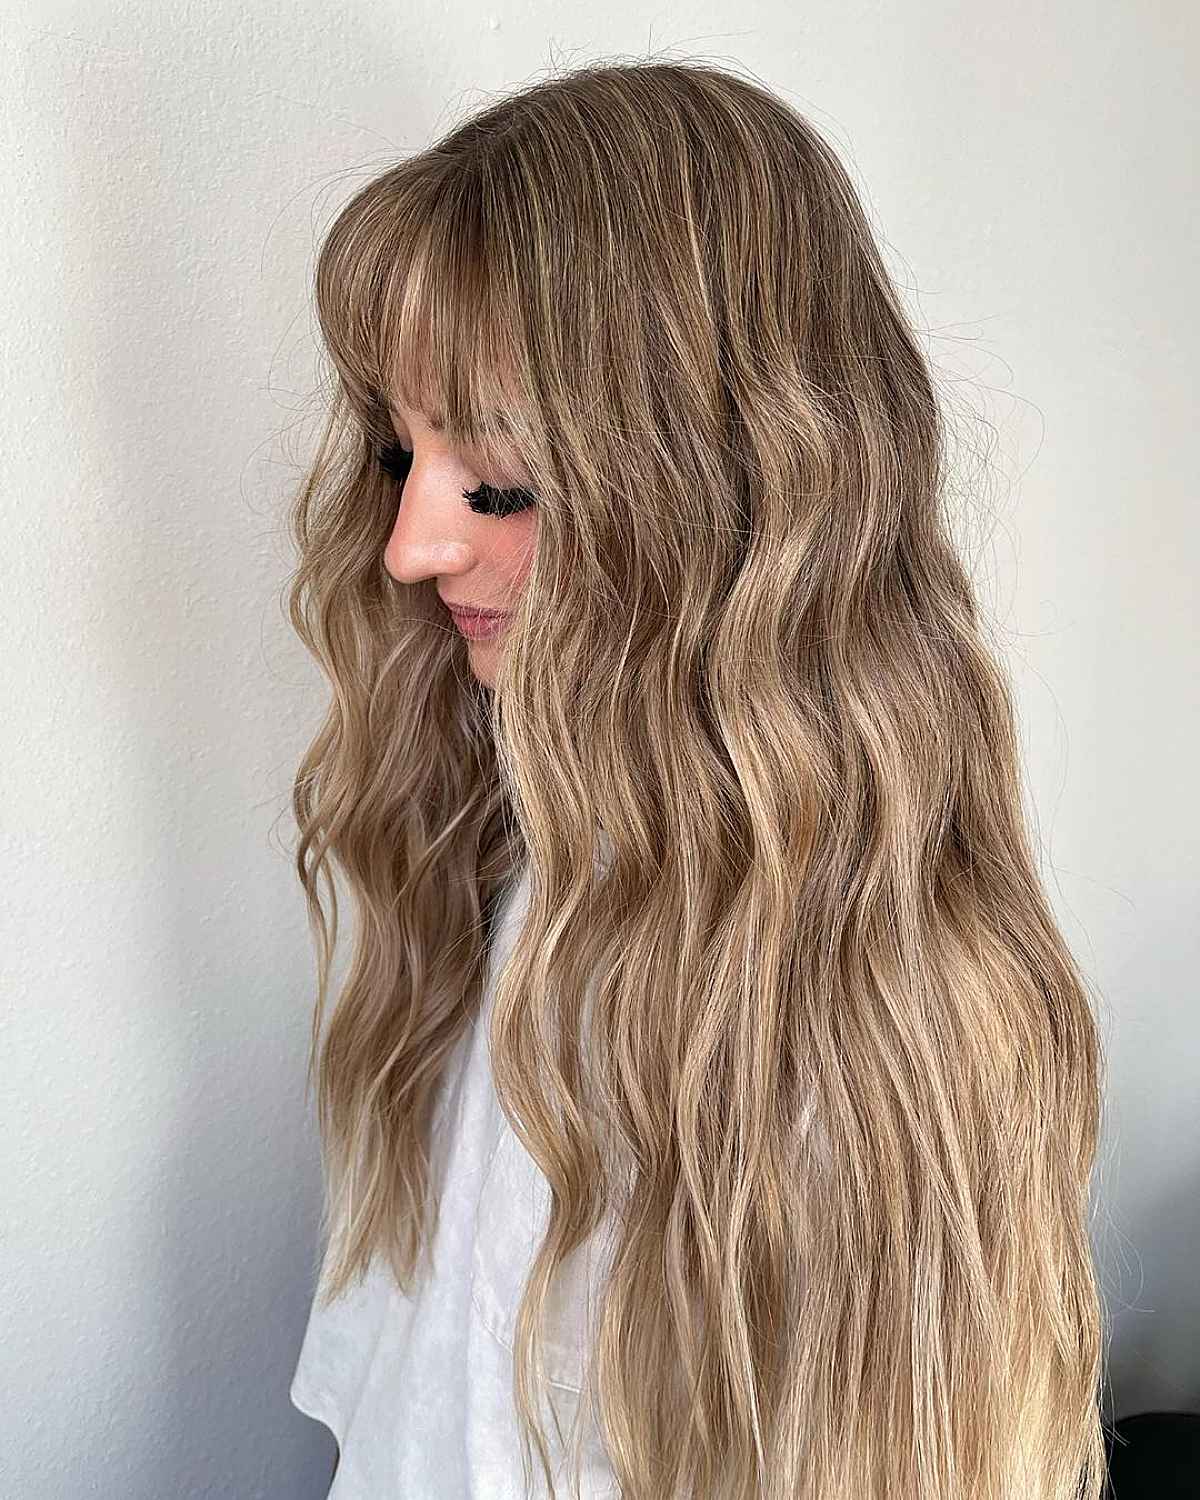 Middle Parted Wispy Bangs on Long Wavy Hair